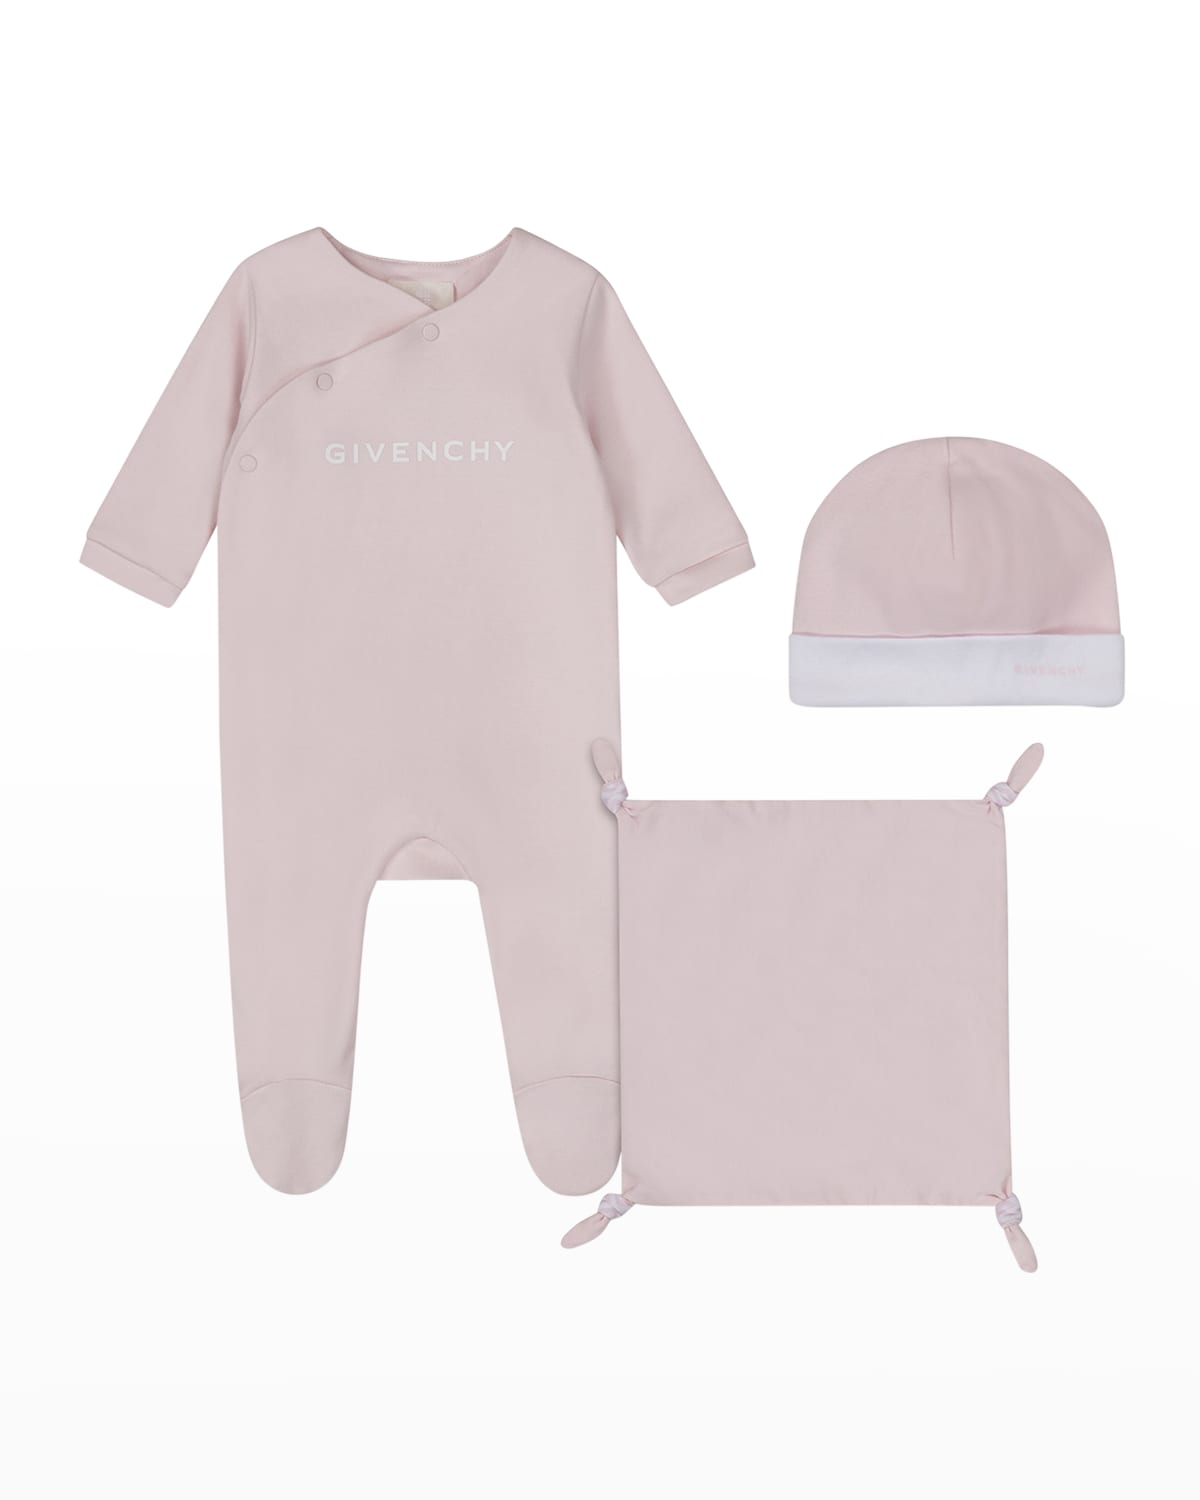 Givenchy Kid's 3-piece Gift Set In Pink